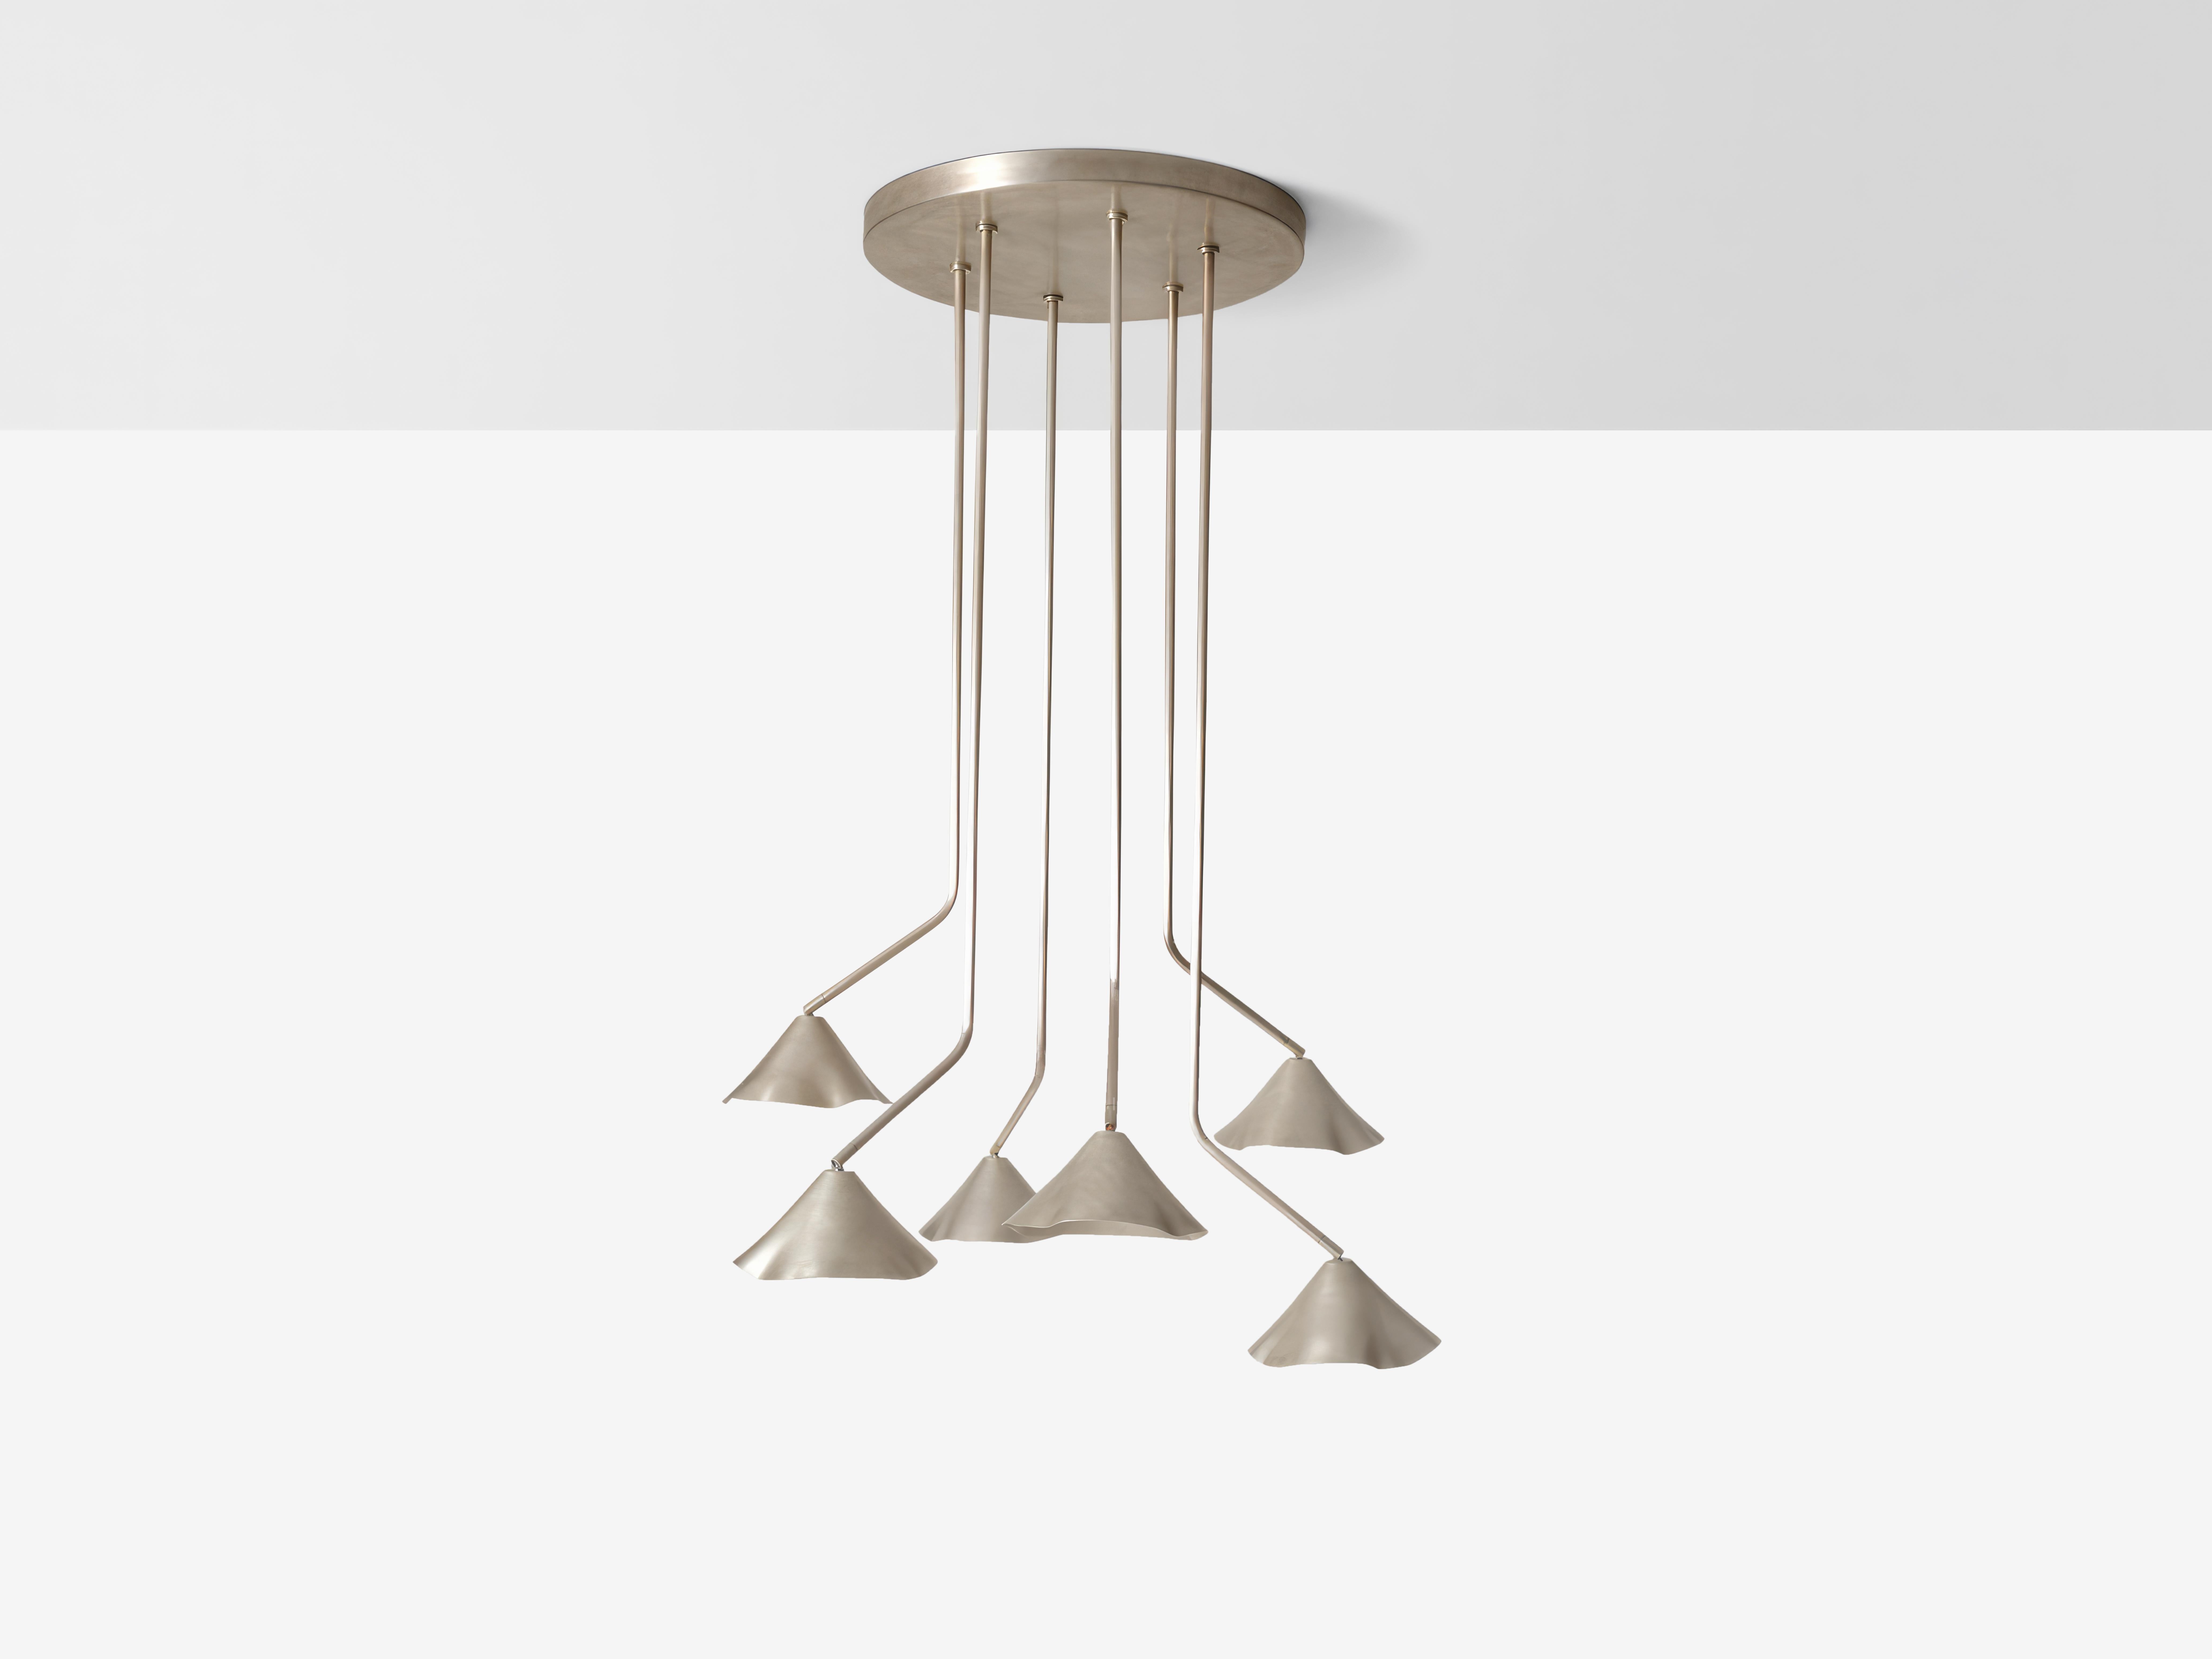 Silver Antica III Chandelier by OHLA STUDIO
Dimensions: D 100 x W 100 x H 180 cm 
Materials: Copper.
14 kg

Available in other finishes: Silver, Forest, and Teal.

A pre-Hispanic smithing tradition thrives by recycling copper scraps into